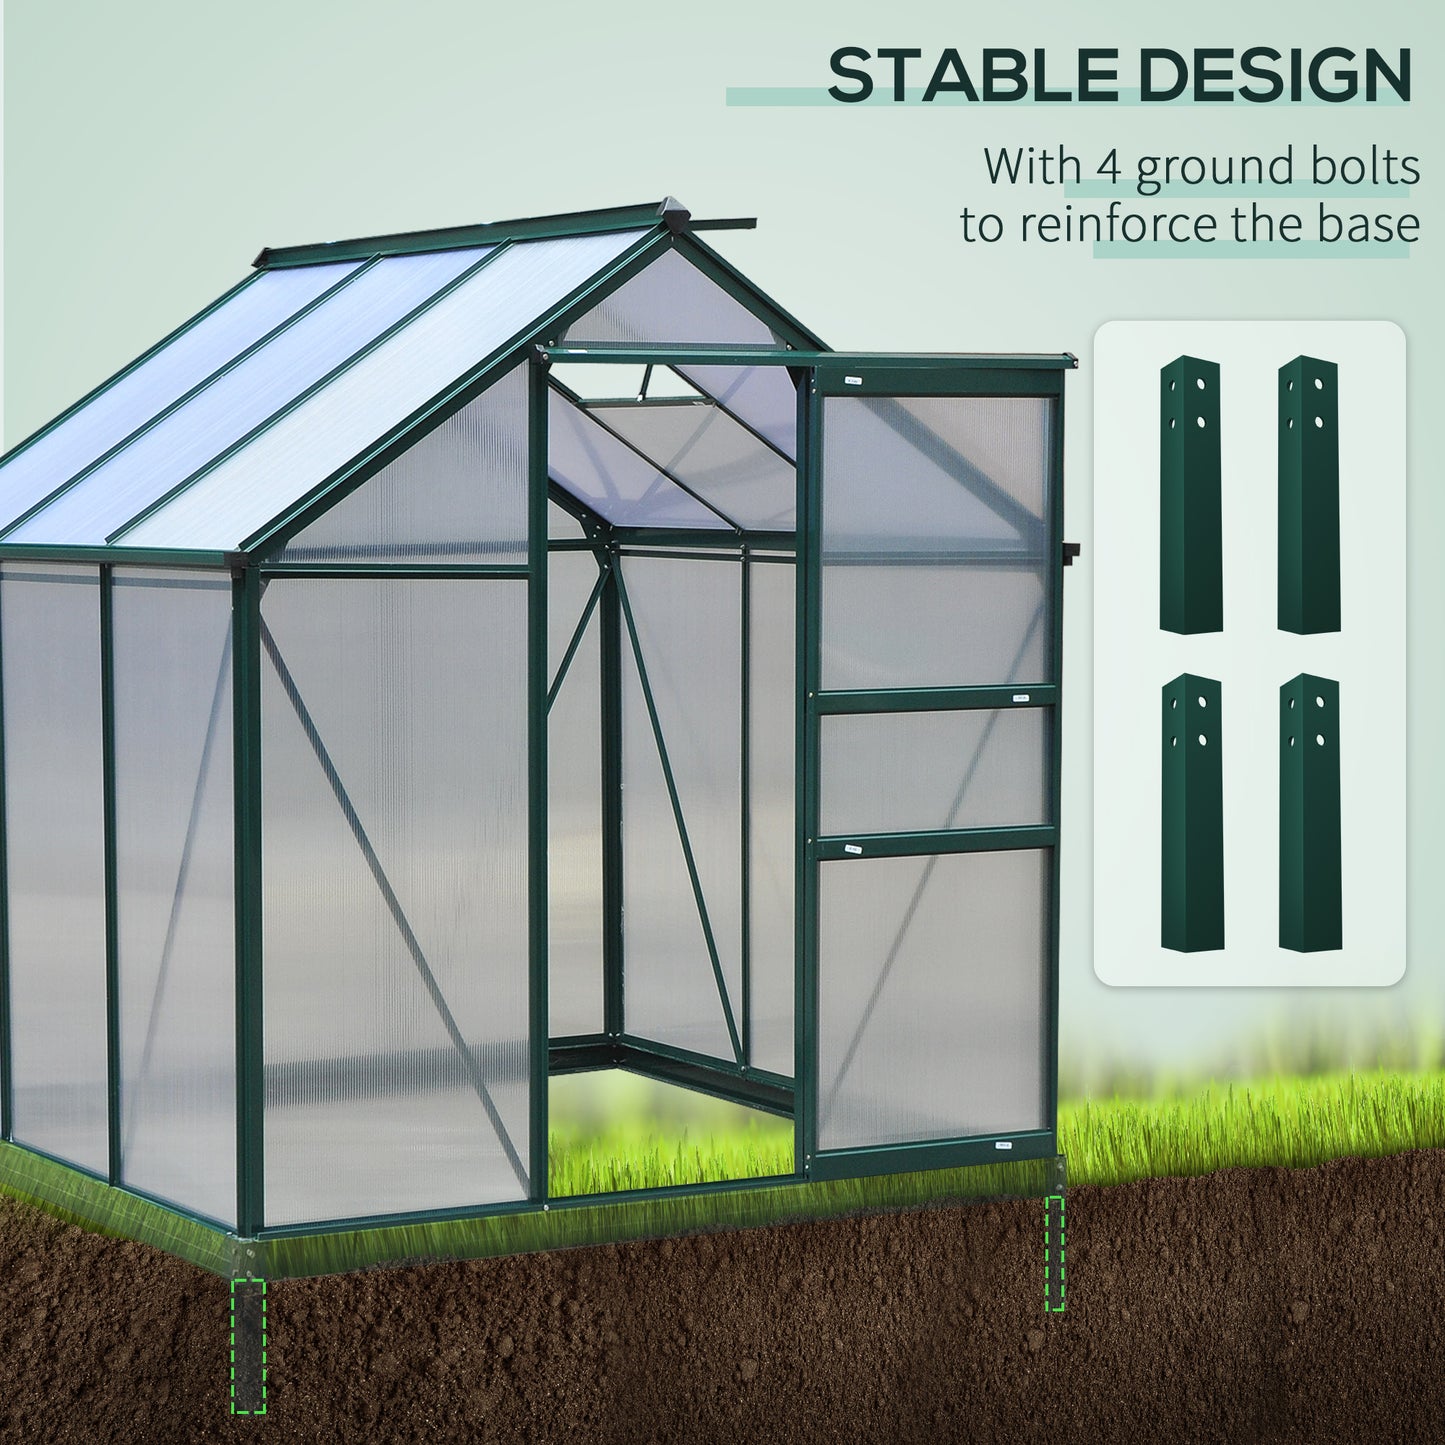 Outsunny Large Walk-In Greenhouse Polycarbonate Garden Greenhouse Plants Grow Galvanized Base Aluminium Frame w/ Slide Door, 6 x 6 ft